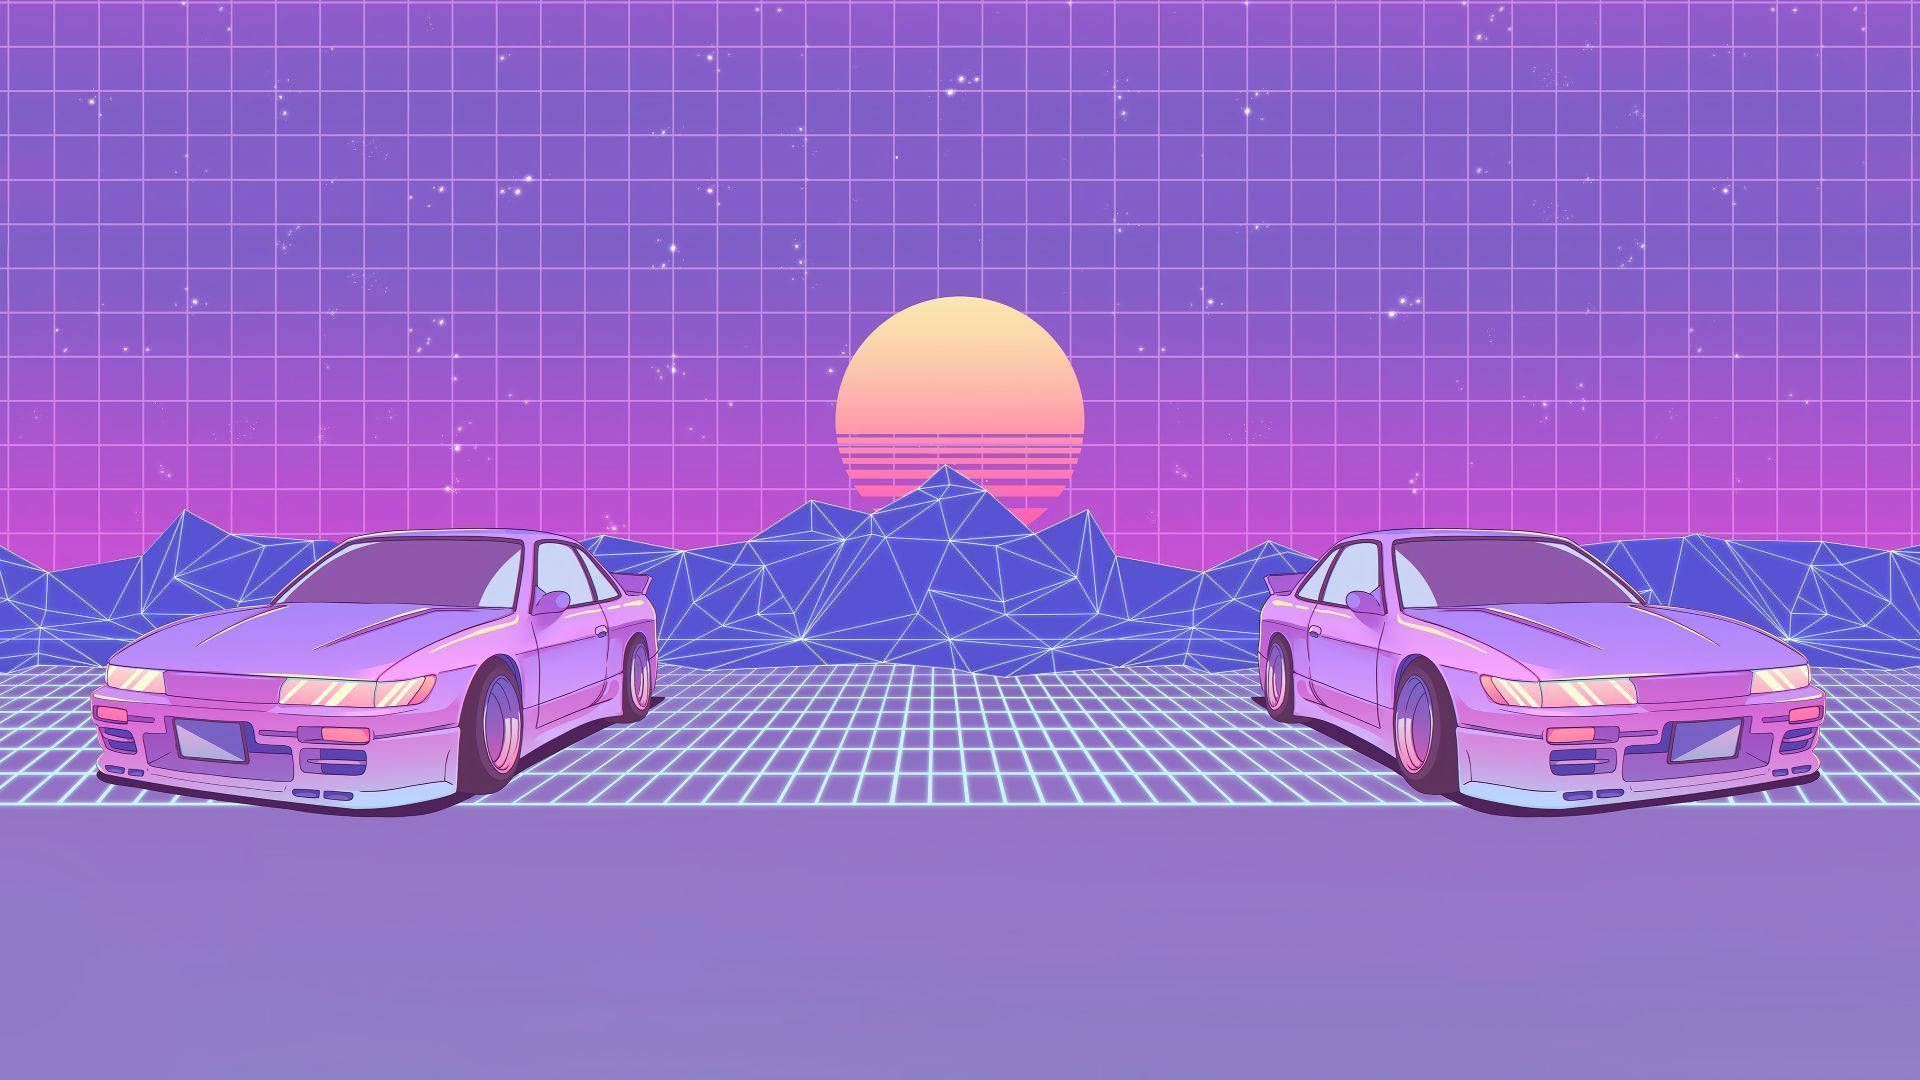 Download Synthwave Jdm Aesthetic Wallpaper